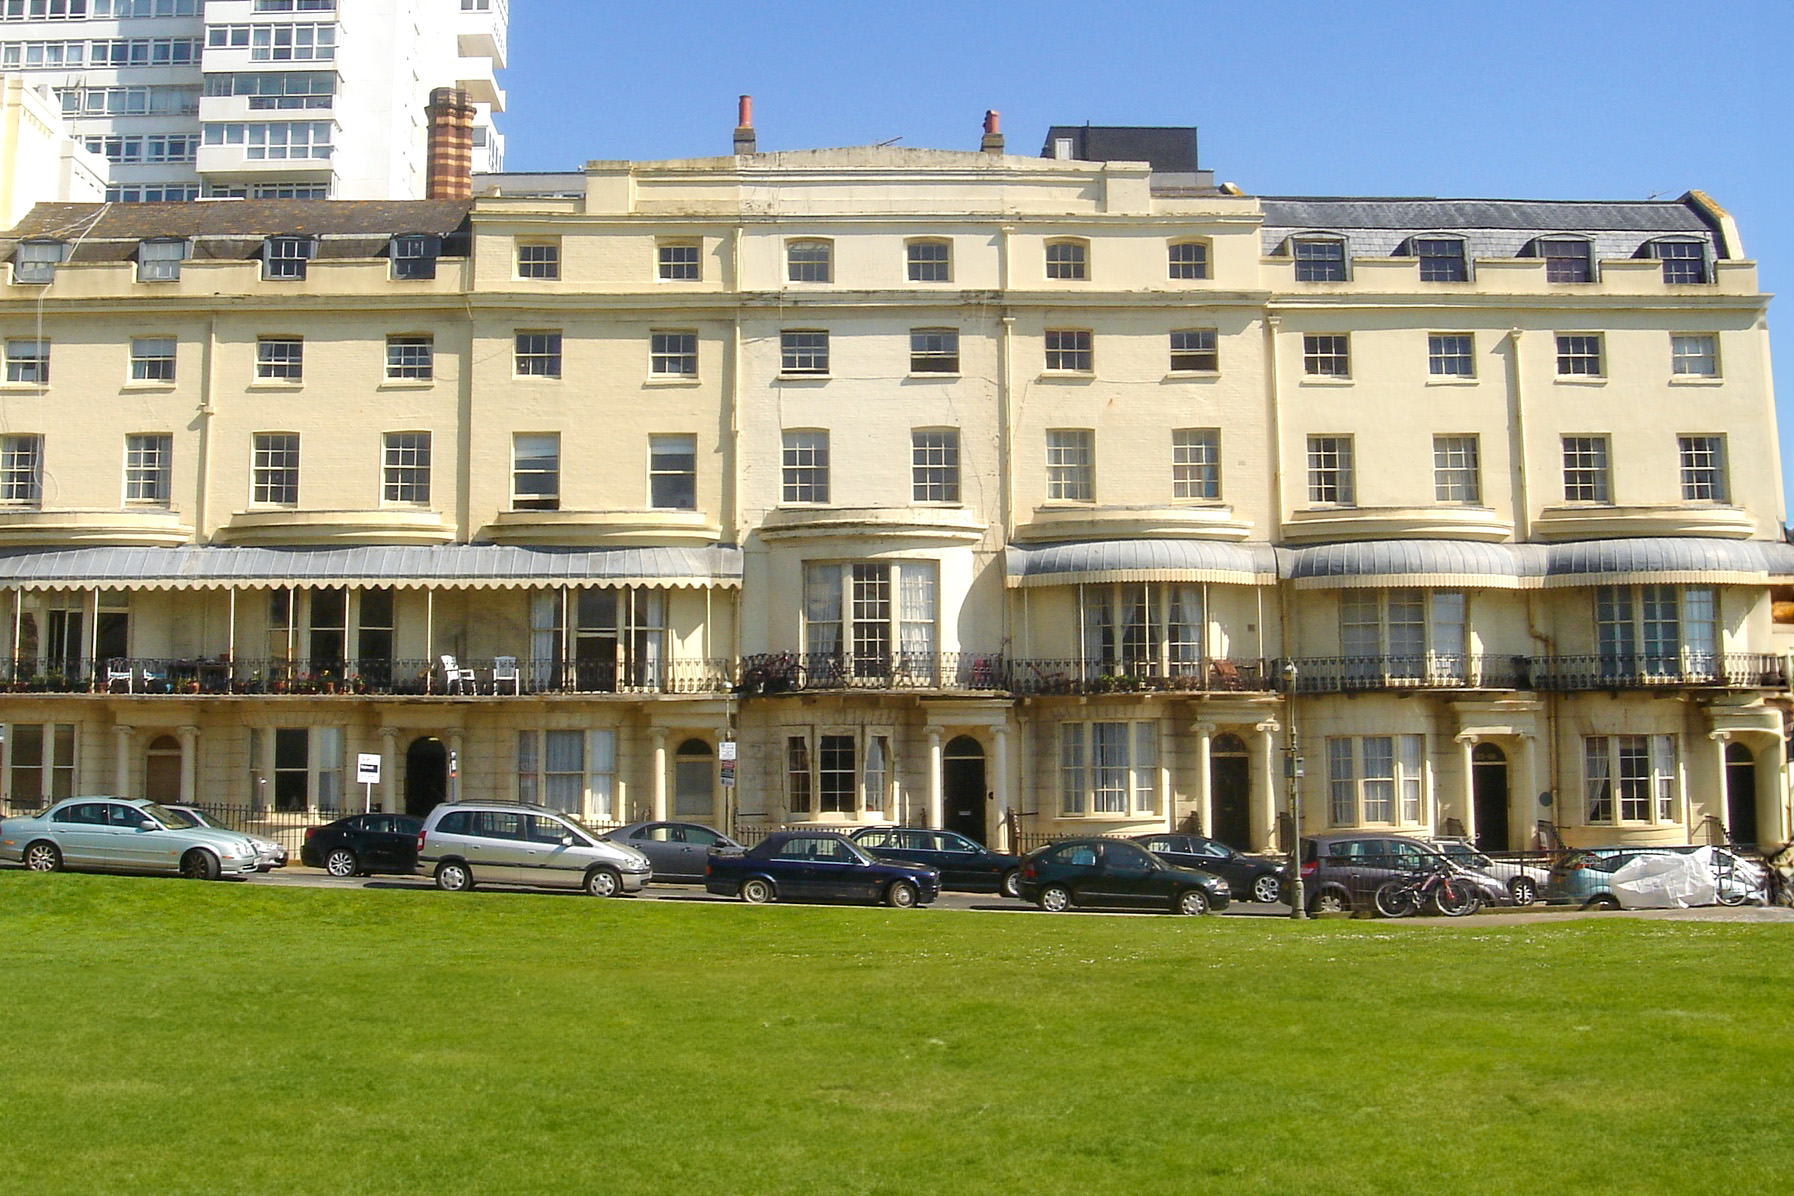 Regency Square. Photo by The Voice of Hassocks [Public Domain via Wikimedia Commons]